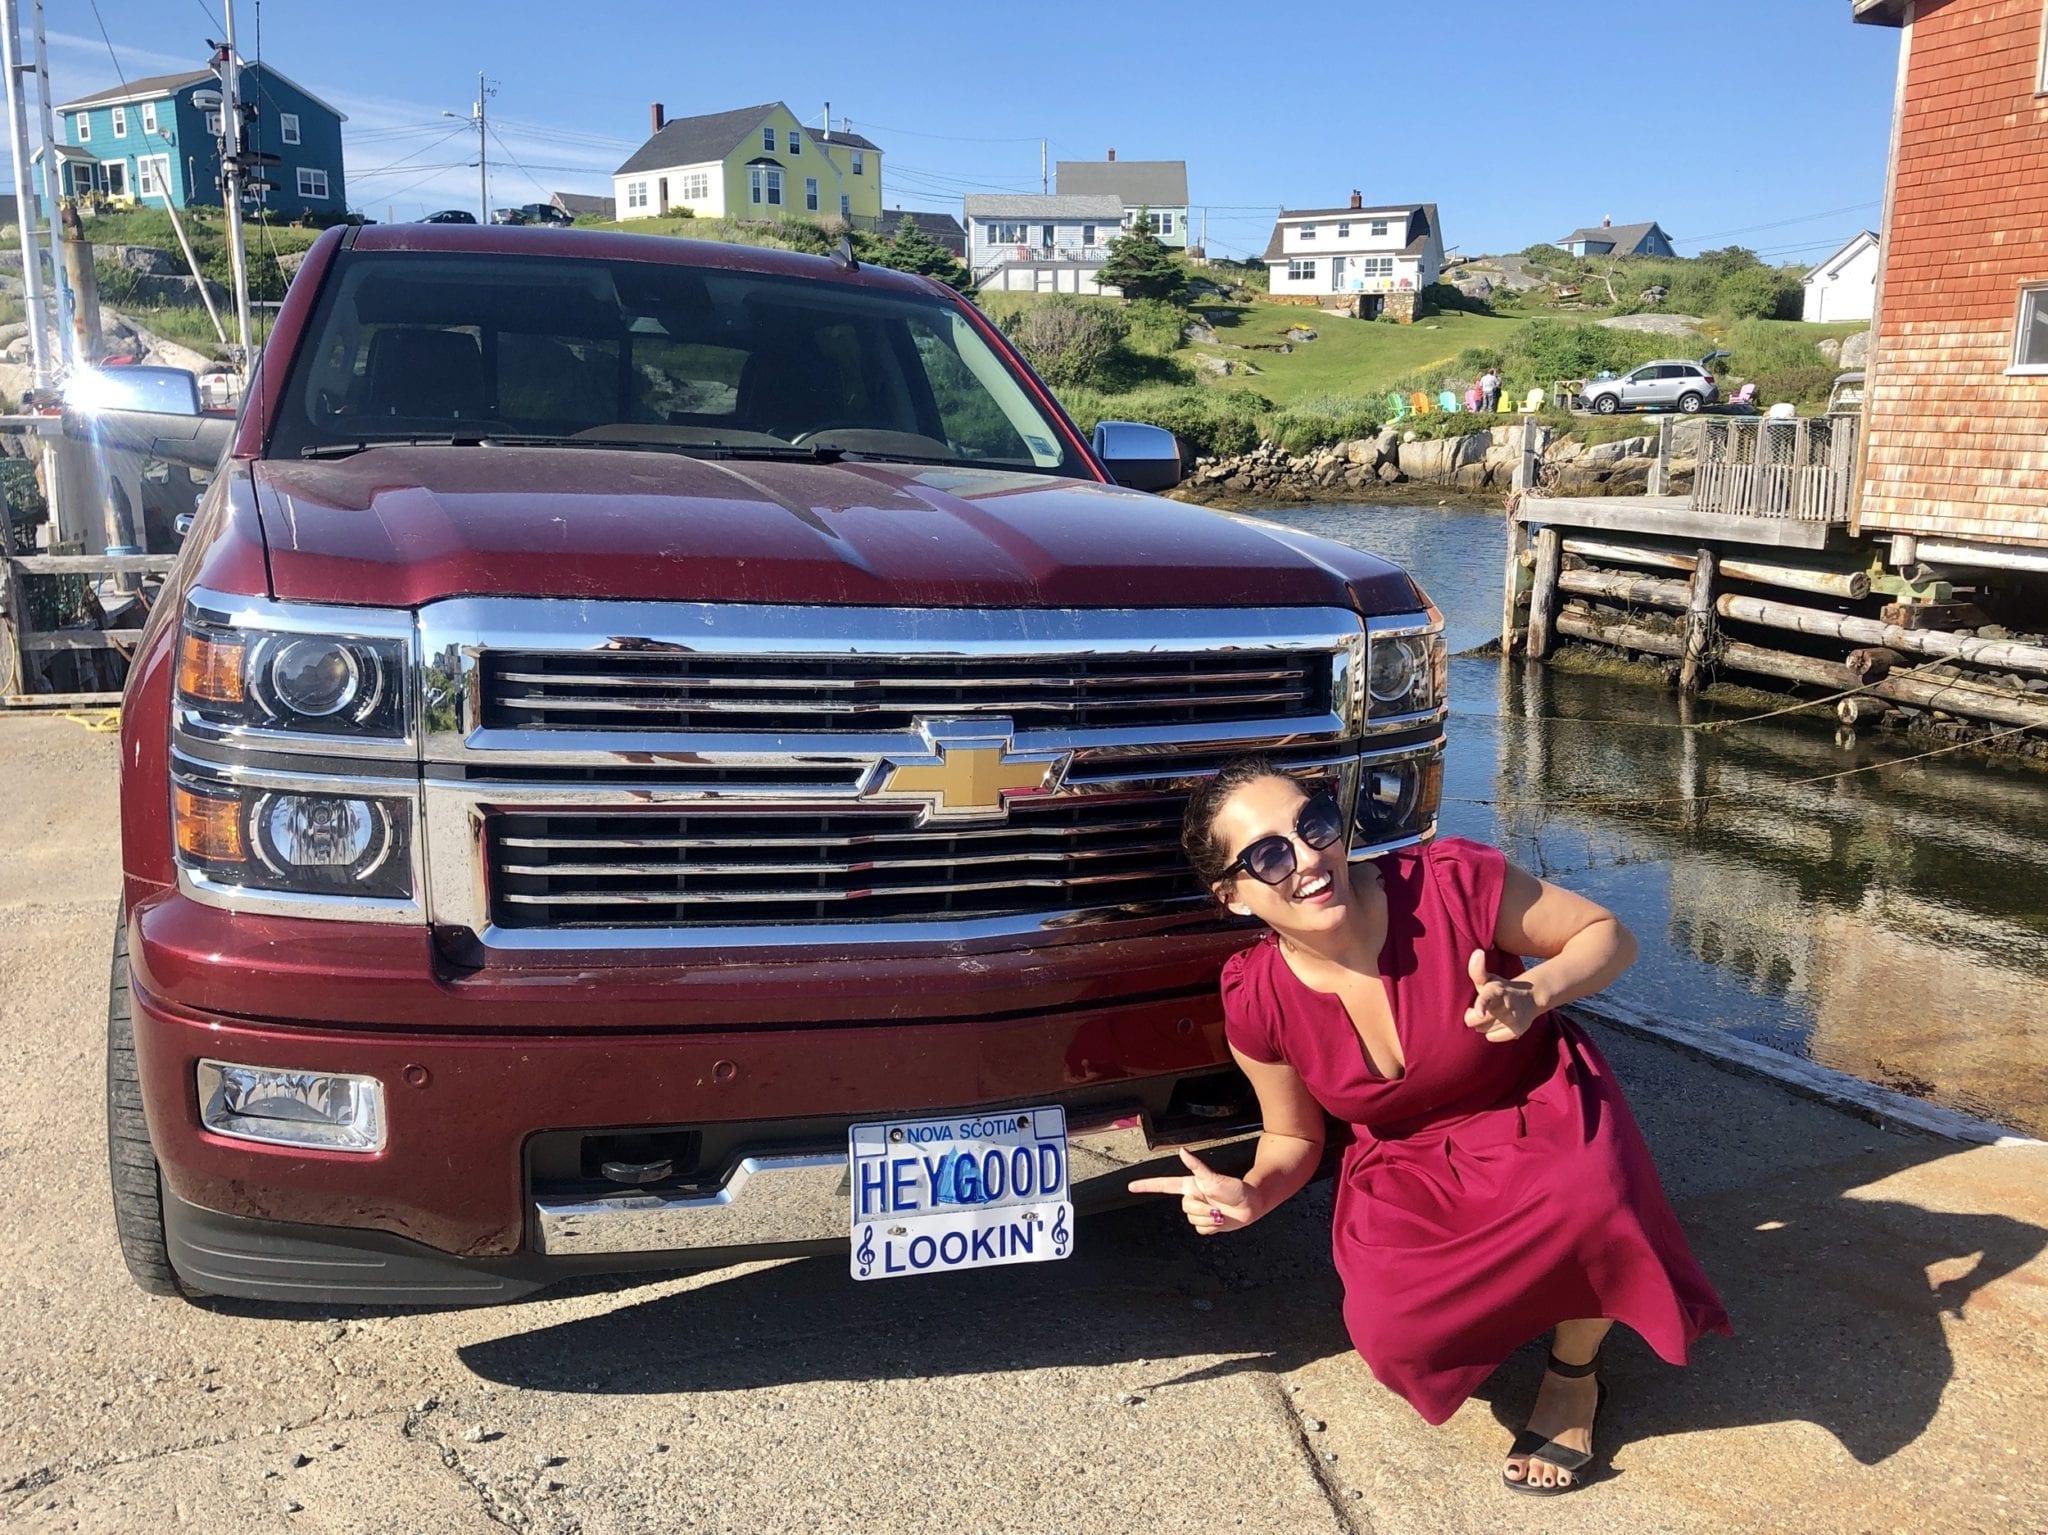 Kate gives two thumbs up in front of a pickup truck with a license plate that reads "HEY GOOD" and a sign beneath that says "LOOKIN."